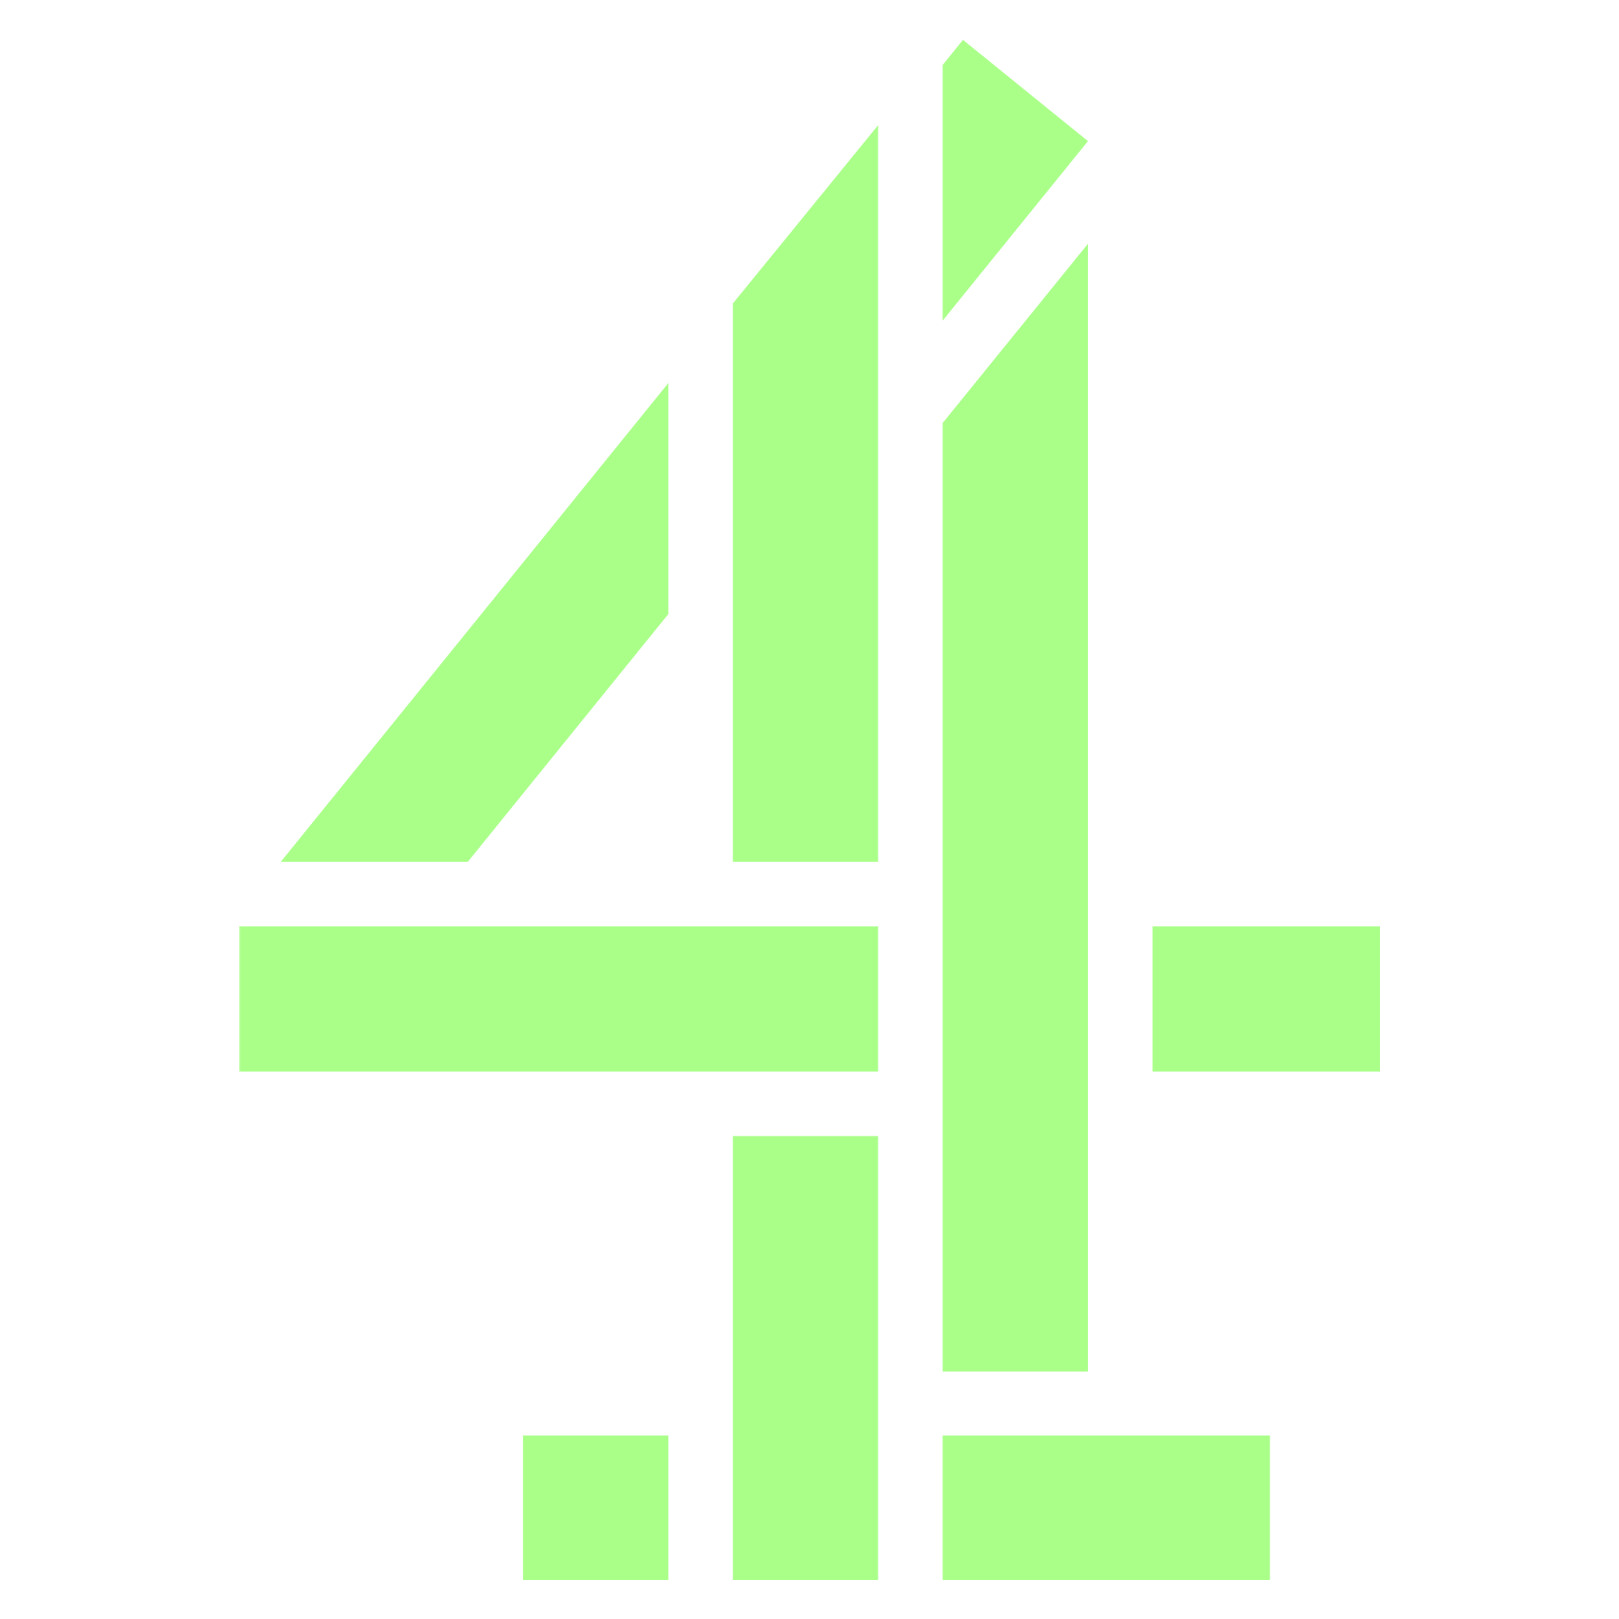 A big green number 4, Channel 4's logo.